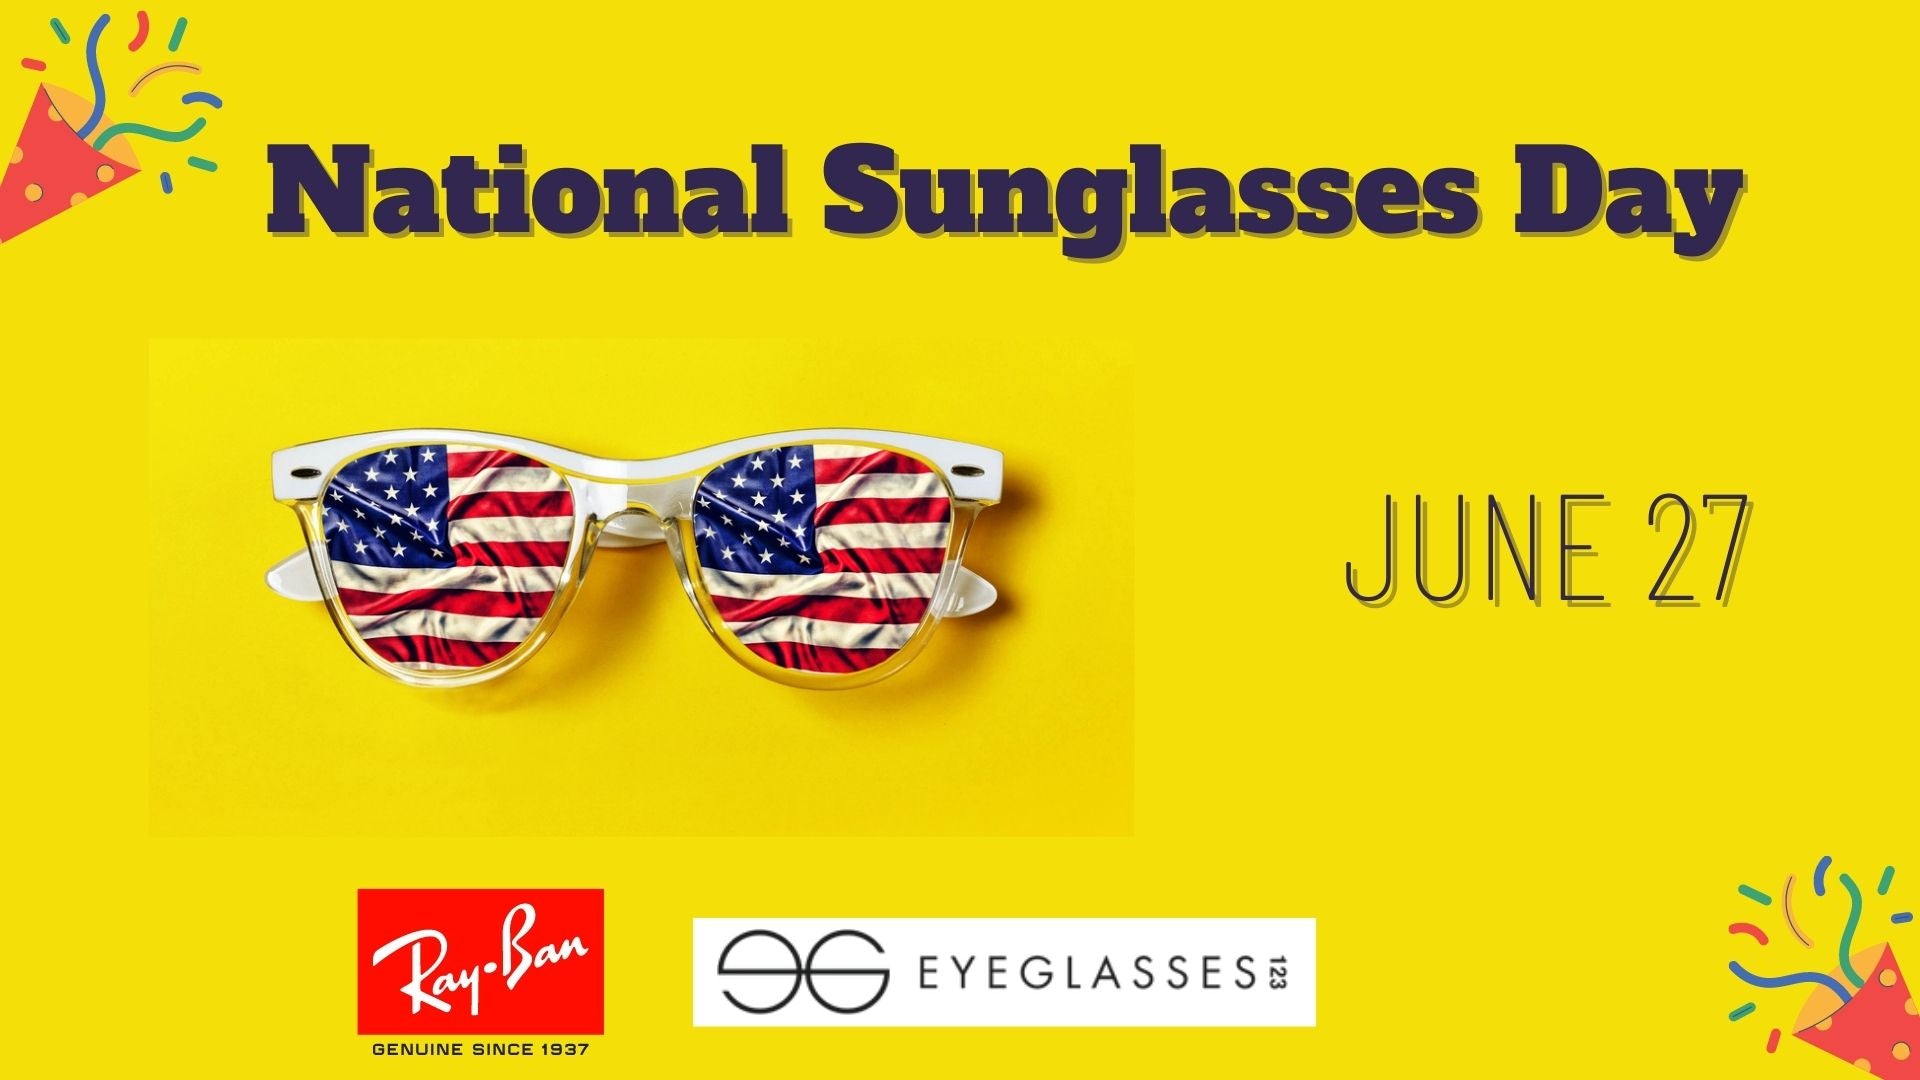 When Is National Sunglasses Day?